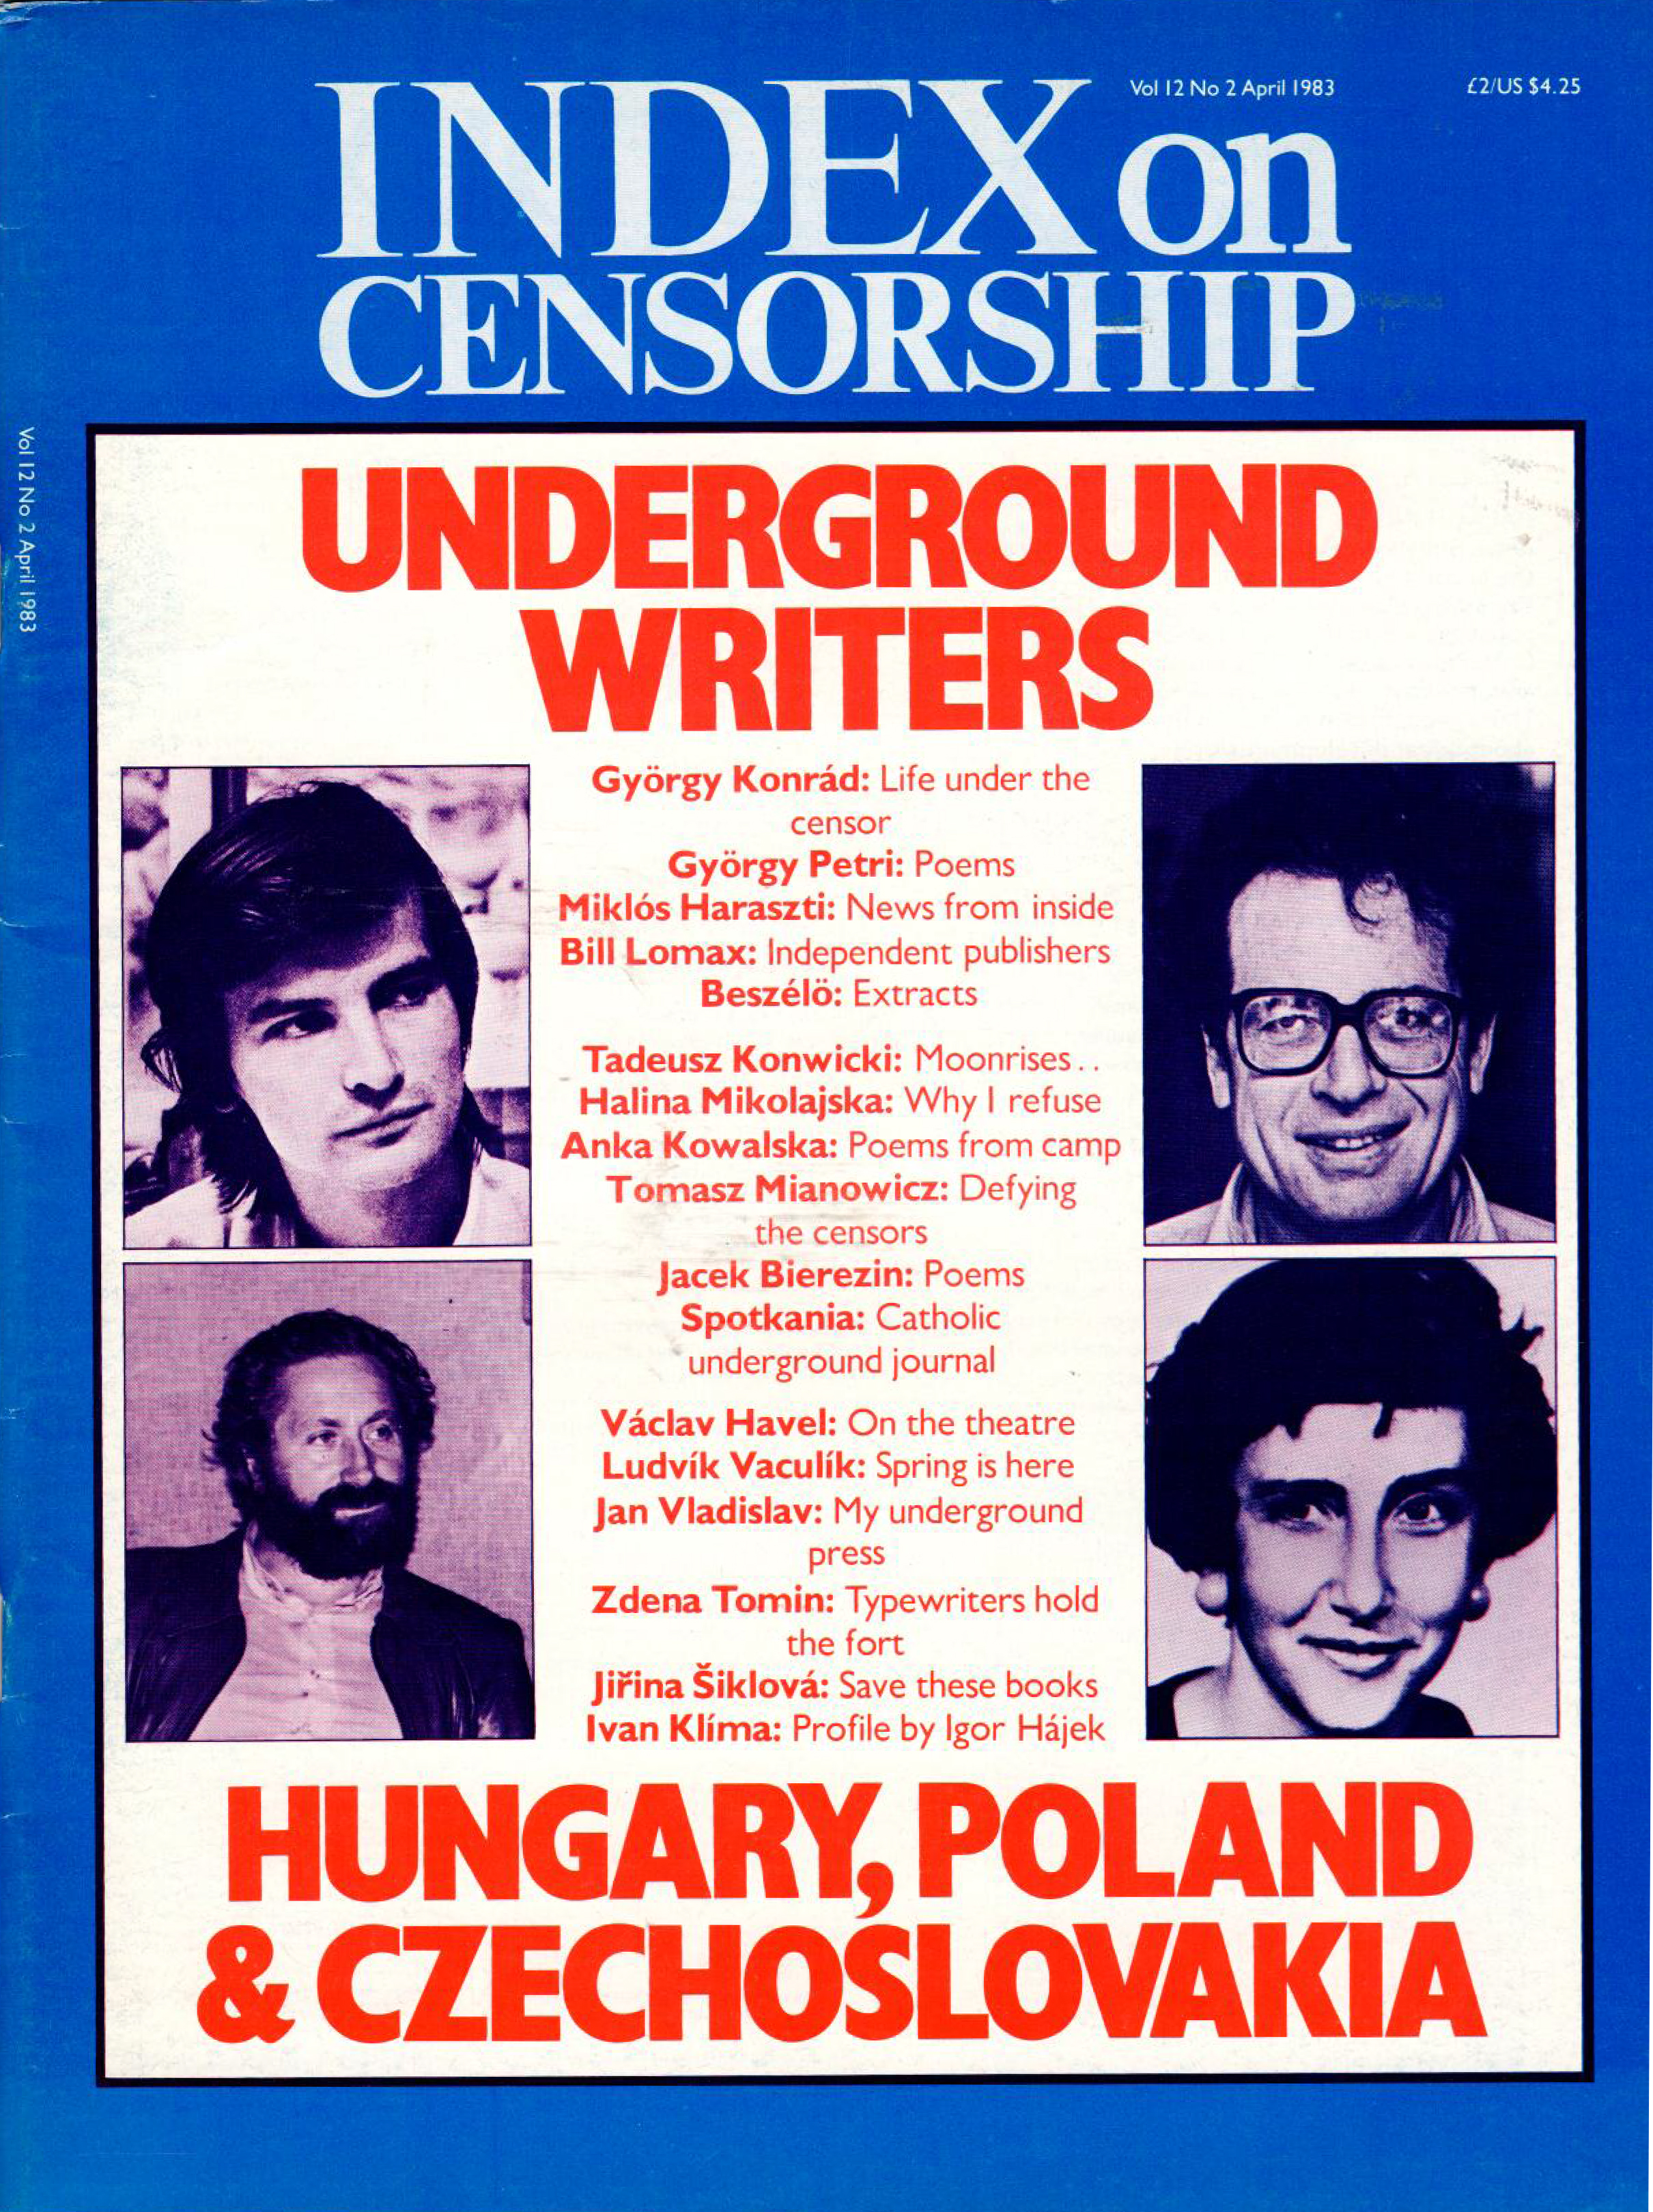 Underground writers: Life under the censor, the April 1983 issue of Index on Censorship magazine.